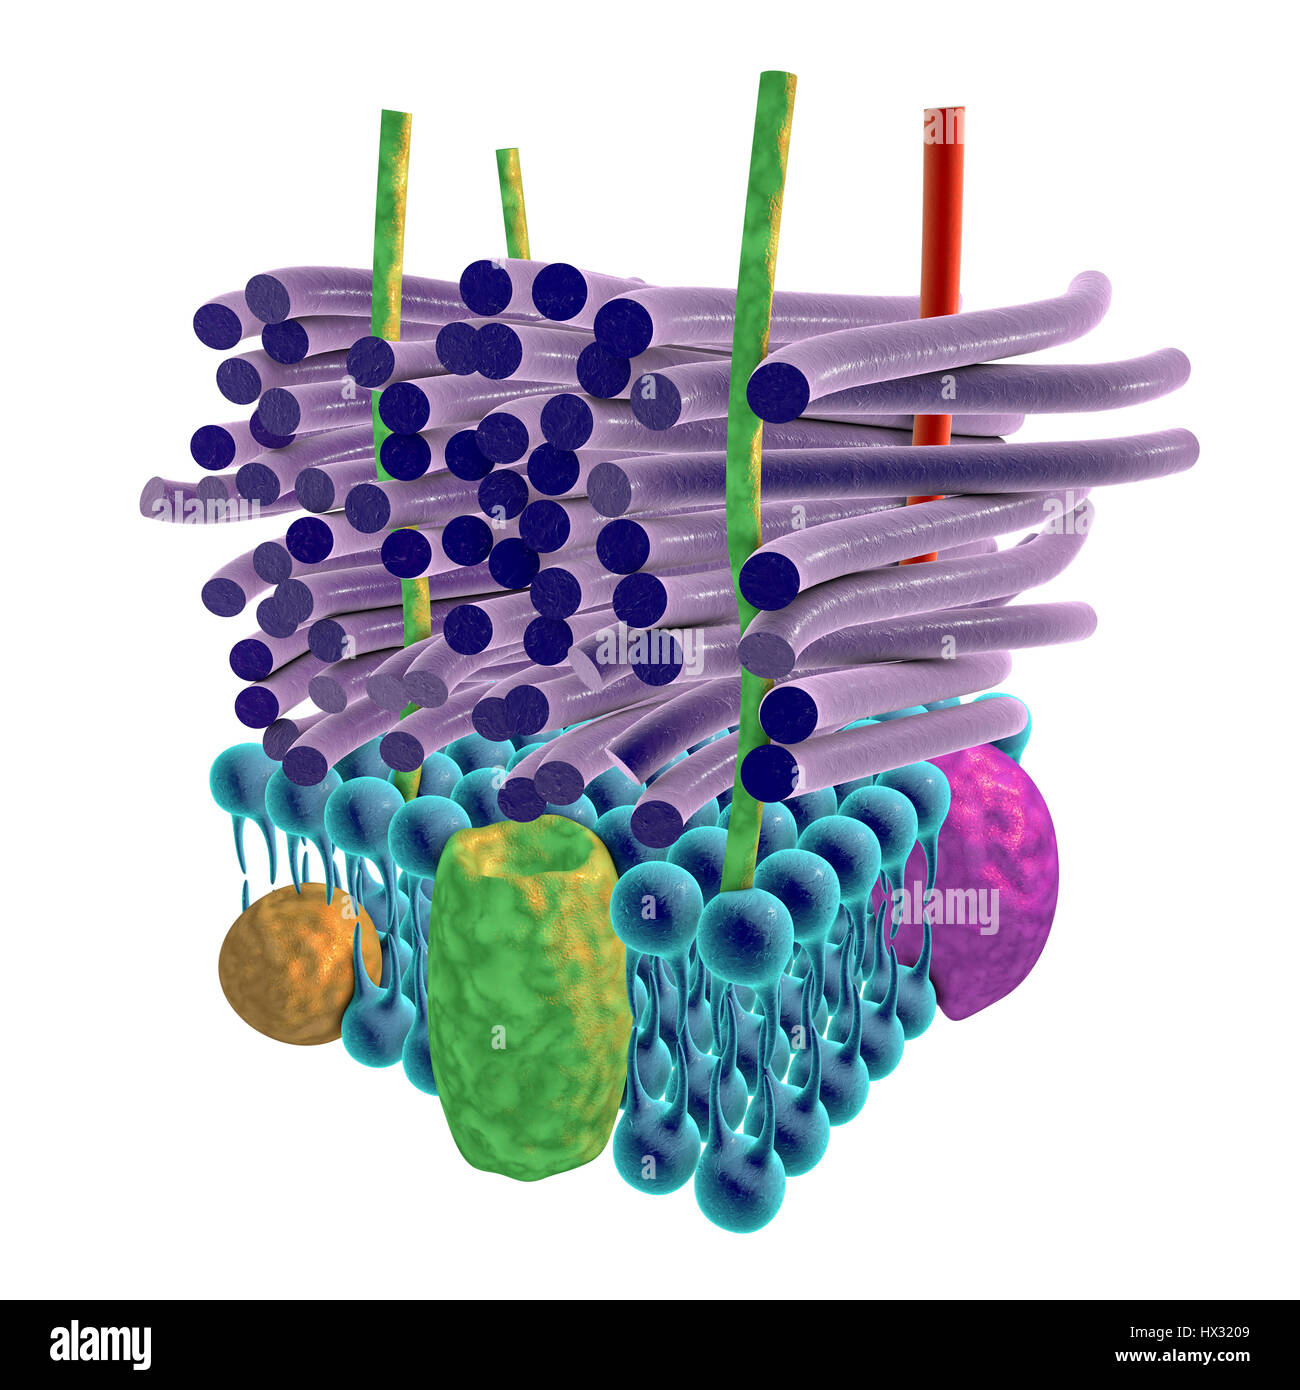 Gram-positive bacterial cell wall, artwork. The horizontal layers include a plasma membrane (blue) containing transmembrane proteins (green, yellow and purple). Above this is a thick peptidoglycan layer (purple rods) that is held together by teichoic acids (red rods) and lipoteichoic acids (green rods). This is termed a Gram-positive cell wall because the thick layer of peptidoglycan retains the Gram stain that helps identify microbial life. Stock Photo